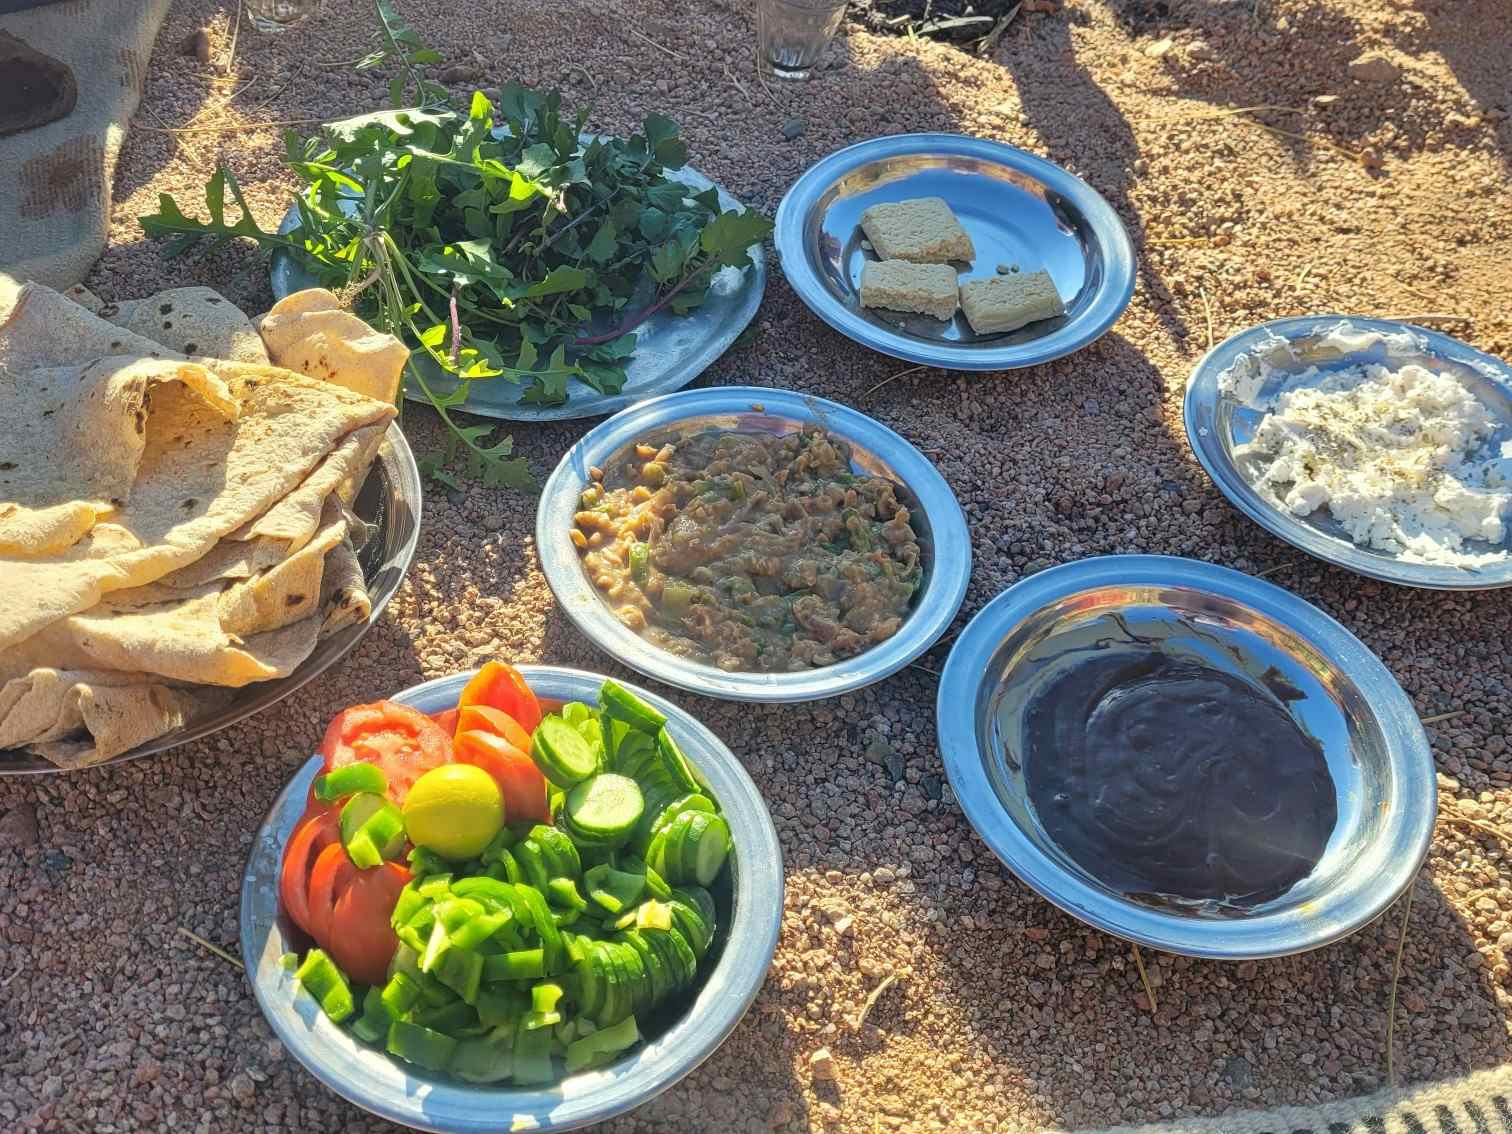 A selection of fresh Egyptian Bedouin-style dishes, including flatbreads, salad, fuul, cheese and honey